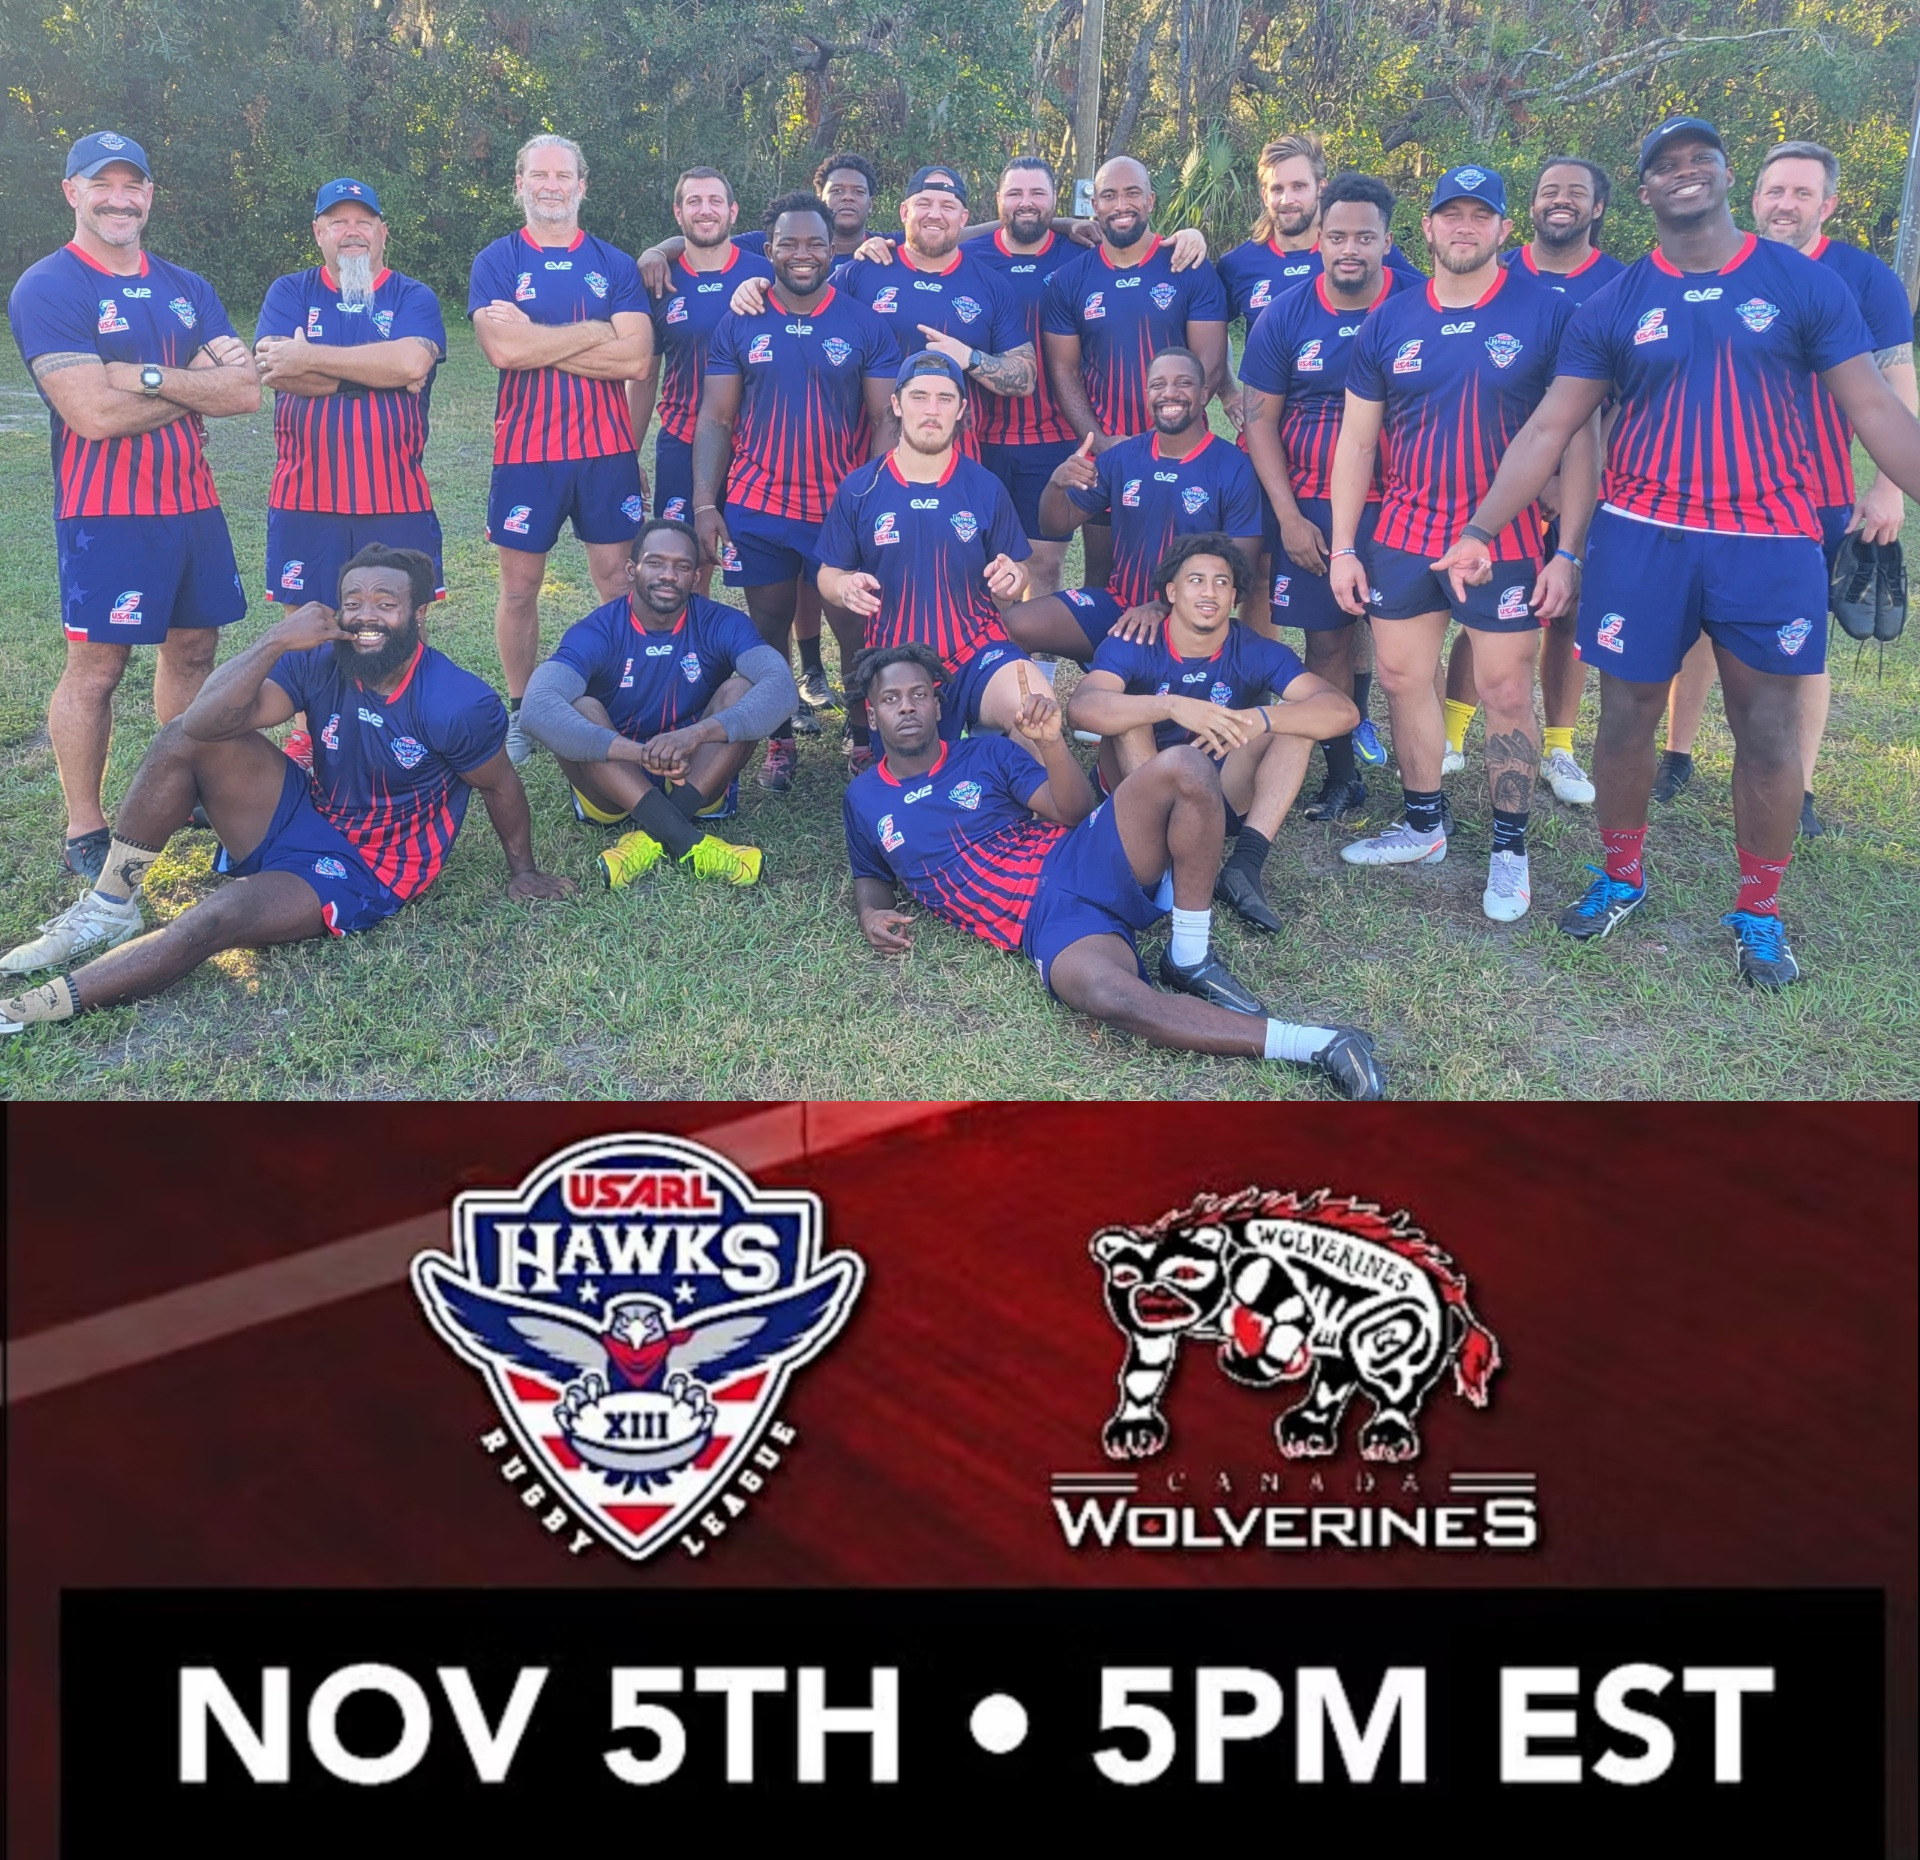 USA Hawks vs Canada Wolverines streamed live on YouTube